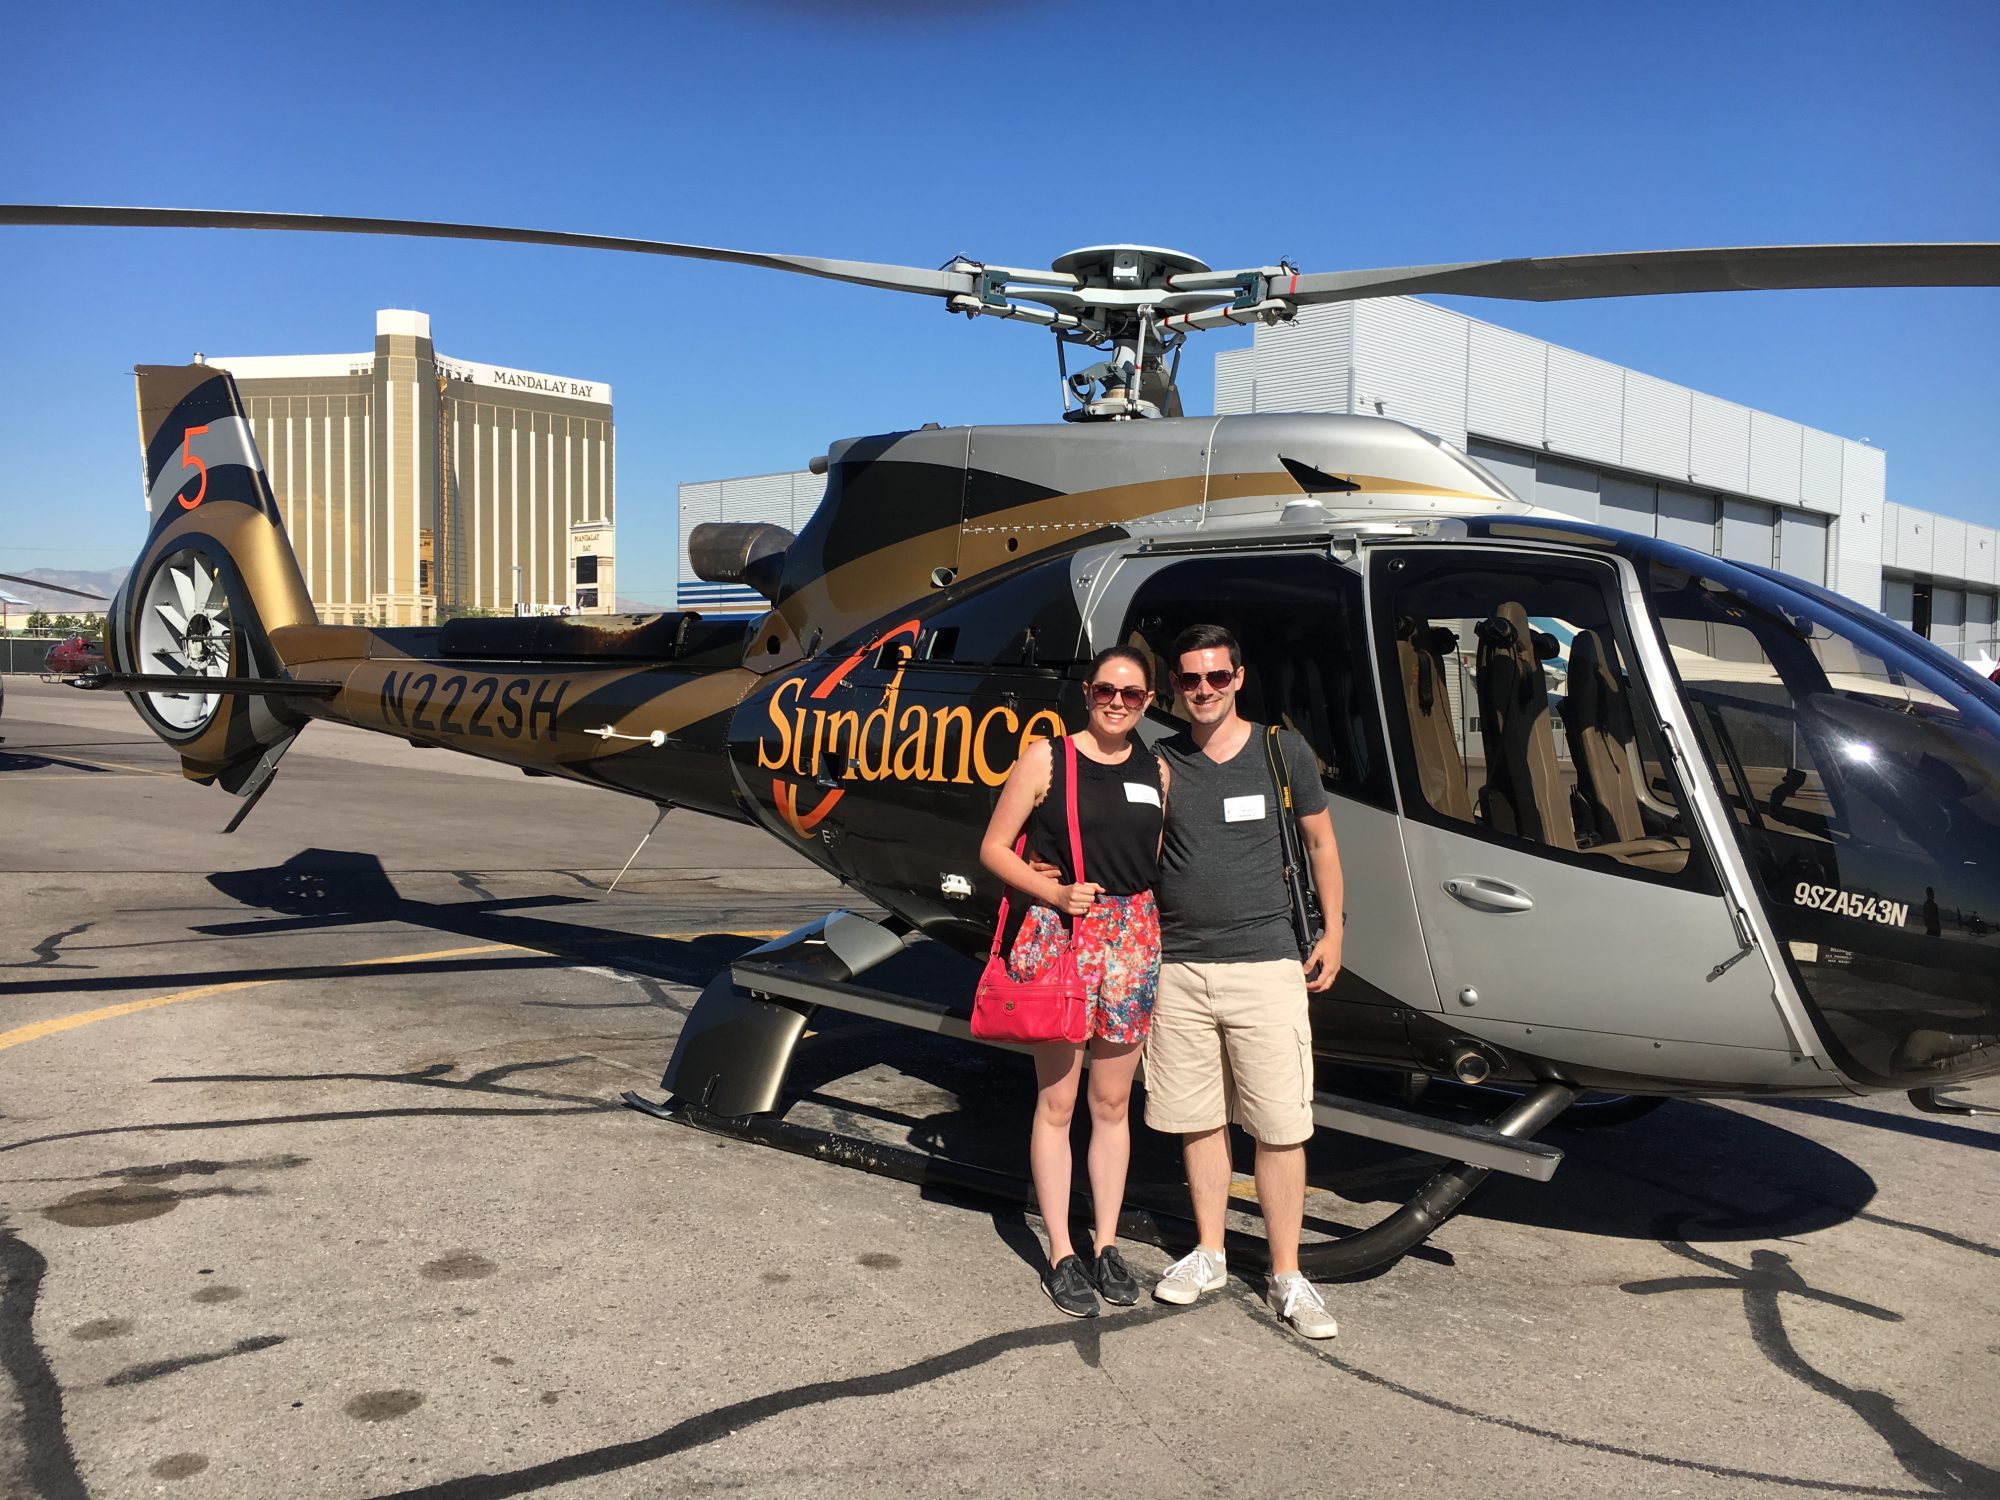 Sundance Helicopter tour of the Grand Canyon